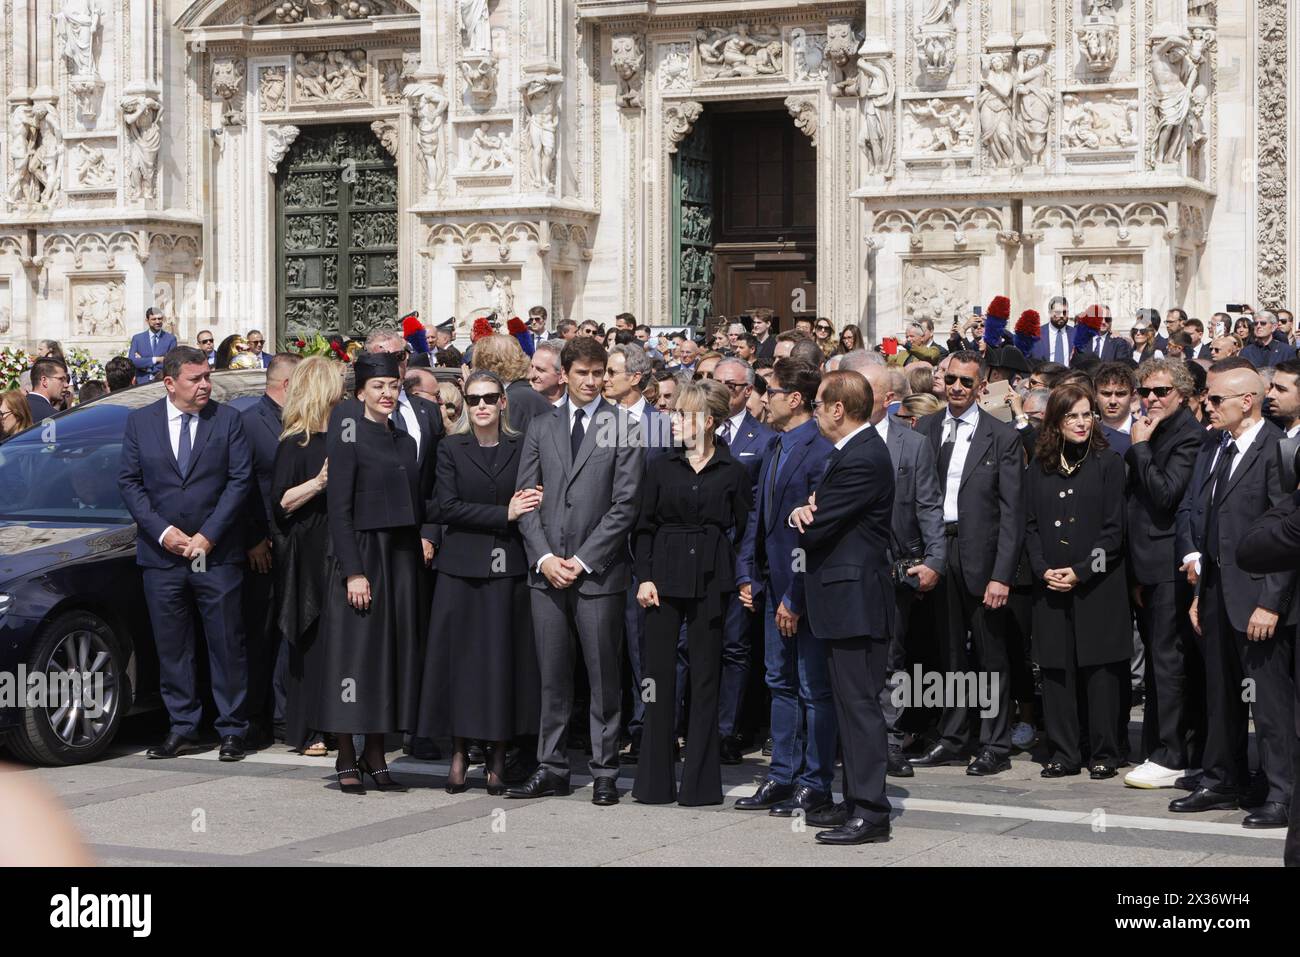 Milano, Italia, 14 Giugno, 2023. The Berlusconi family at the State Funeral of former Italian Prime Minister Silvio Berlusconi, held at the Milan Cathedral. From left in the group: the two daughters of the Ex Premier Silvio Berlusconi Eleonora and Barbara, his last son Luigi, the first daughter Marina, the first son Pier Silvio Berlusconi with Silvio Berlusconi's brother Paolo. Berlusconi died on June 12, 2023 at the San Raffaele hospital in Milan. The funeral, celebrated by Archbishop Mario Delpini, was broadcast live on giant screens set up in the square for the public.Milano, Italia, 14 Giu Stock Photo